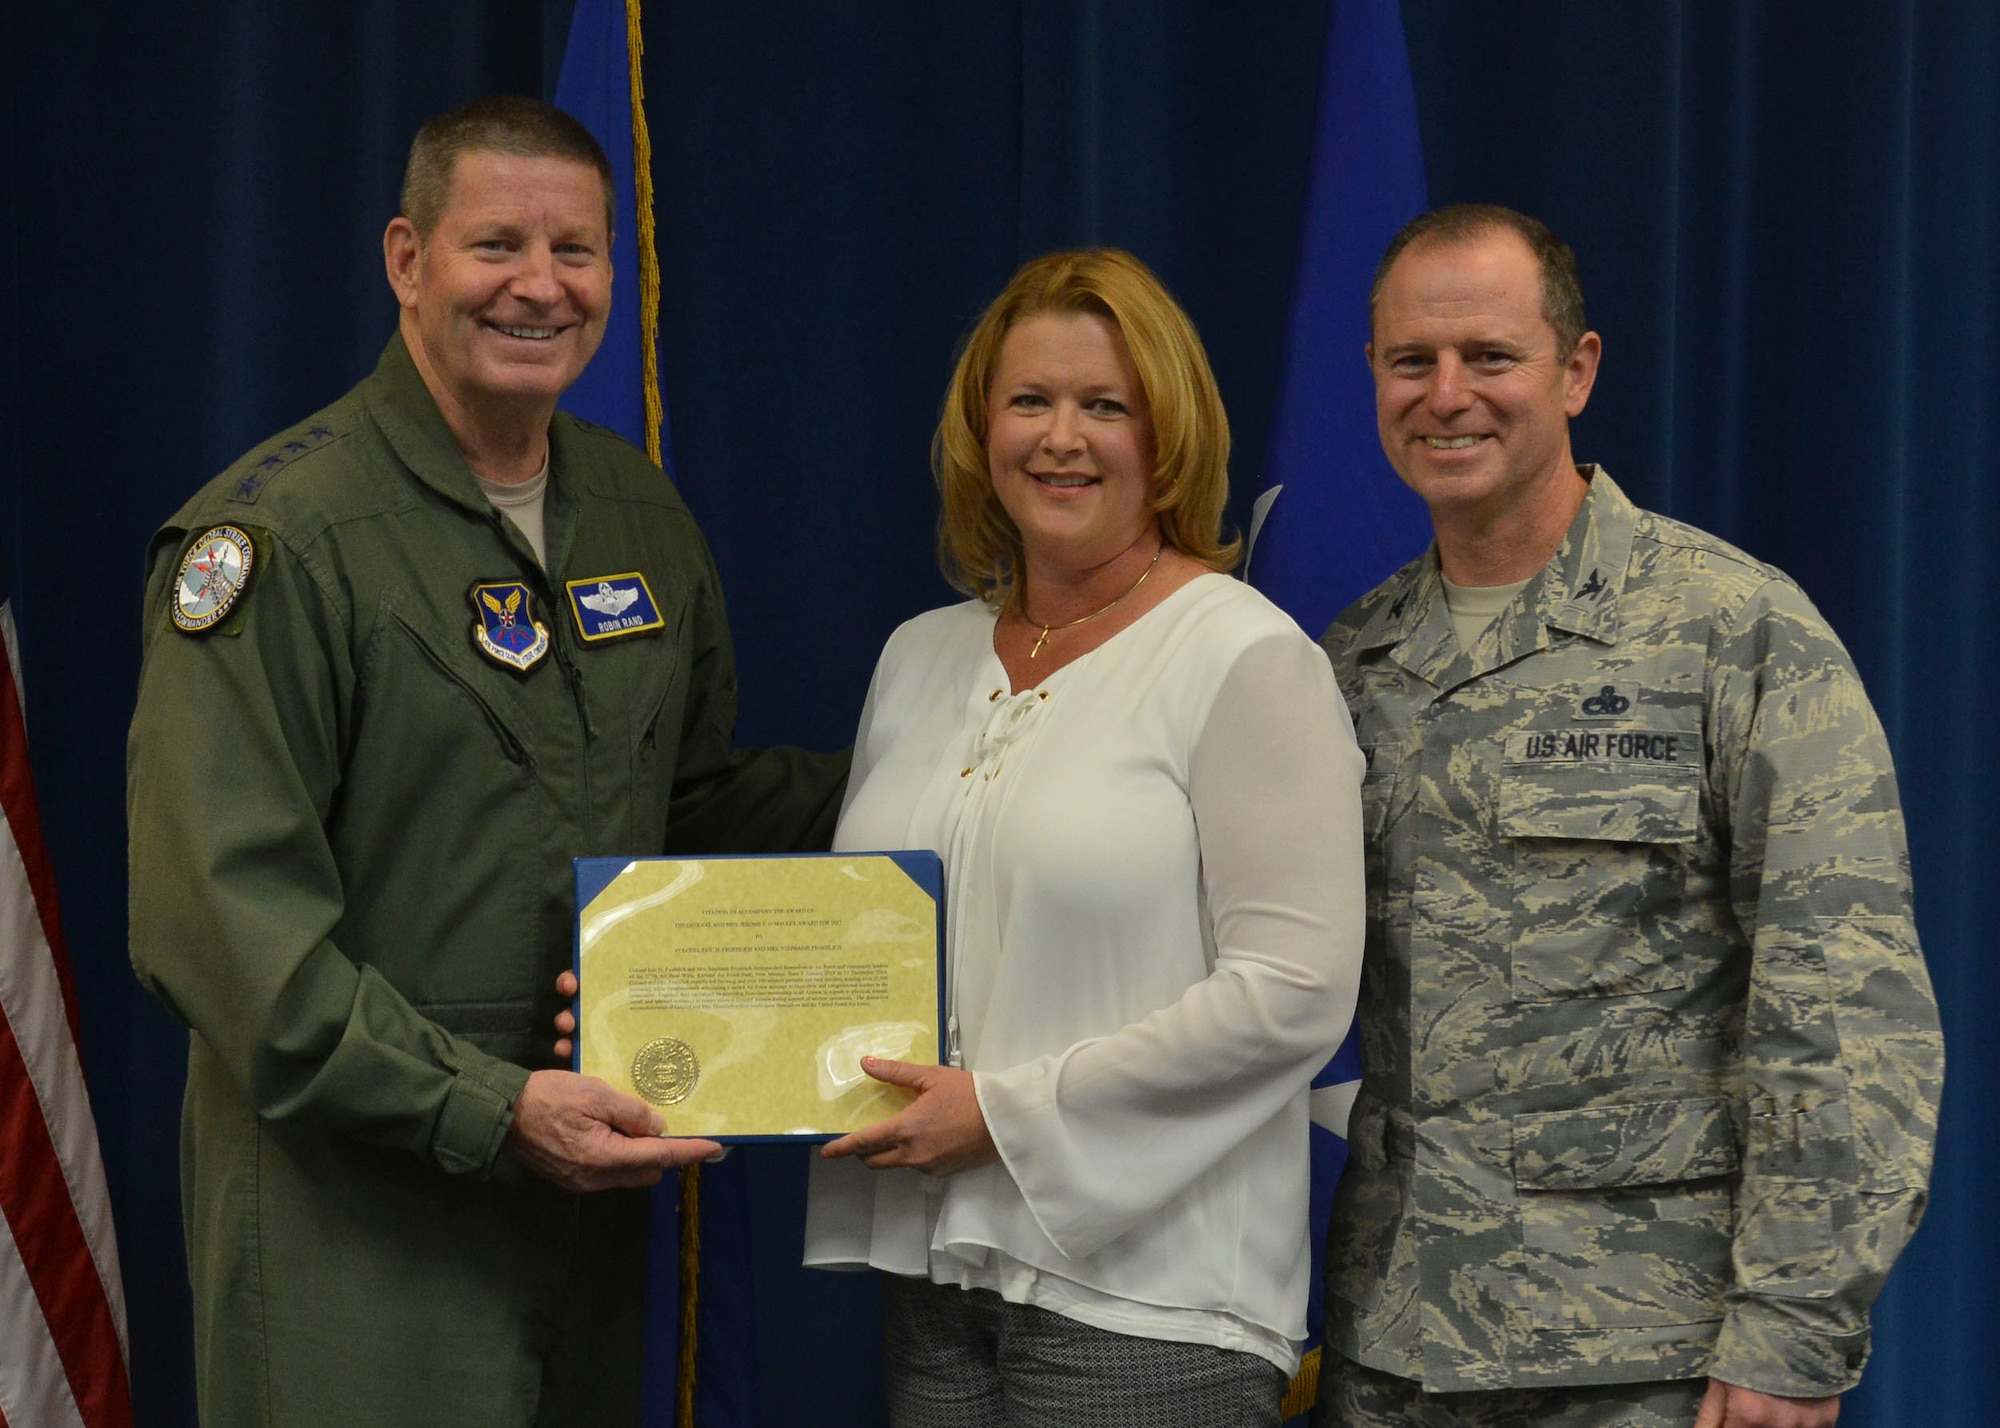 Gen. Robin Rand, Air Force Global Strike Command commander, presents the Air Force 2017 General and Mrs. Jerome O’Malley Award to Col. Eric H. Froehlich and his wife Stephanie during a ceremony at Kirtland Air Force Base, N.M. June 15. The Forehlichs will be invited to Washington D.C. later this year to officially accept the award.
(U.S. Air Force Photo by Senior Airman Bethany La Ville)